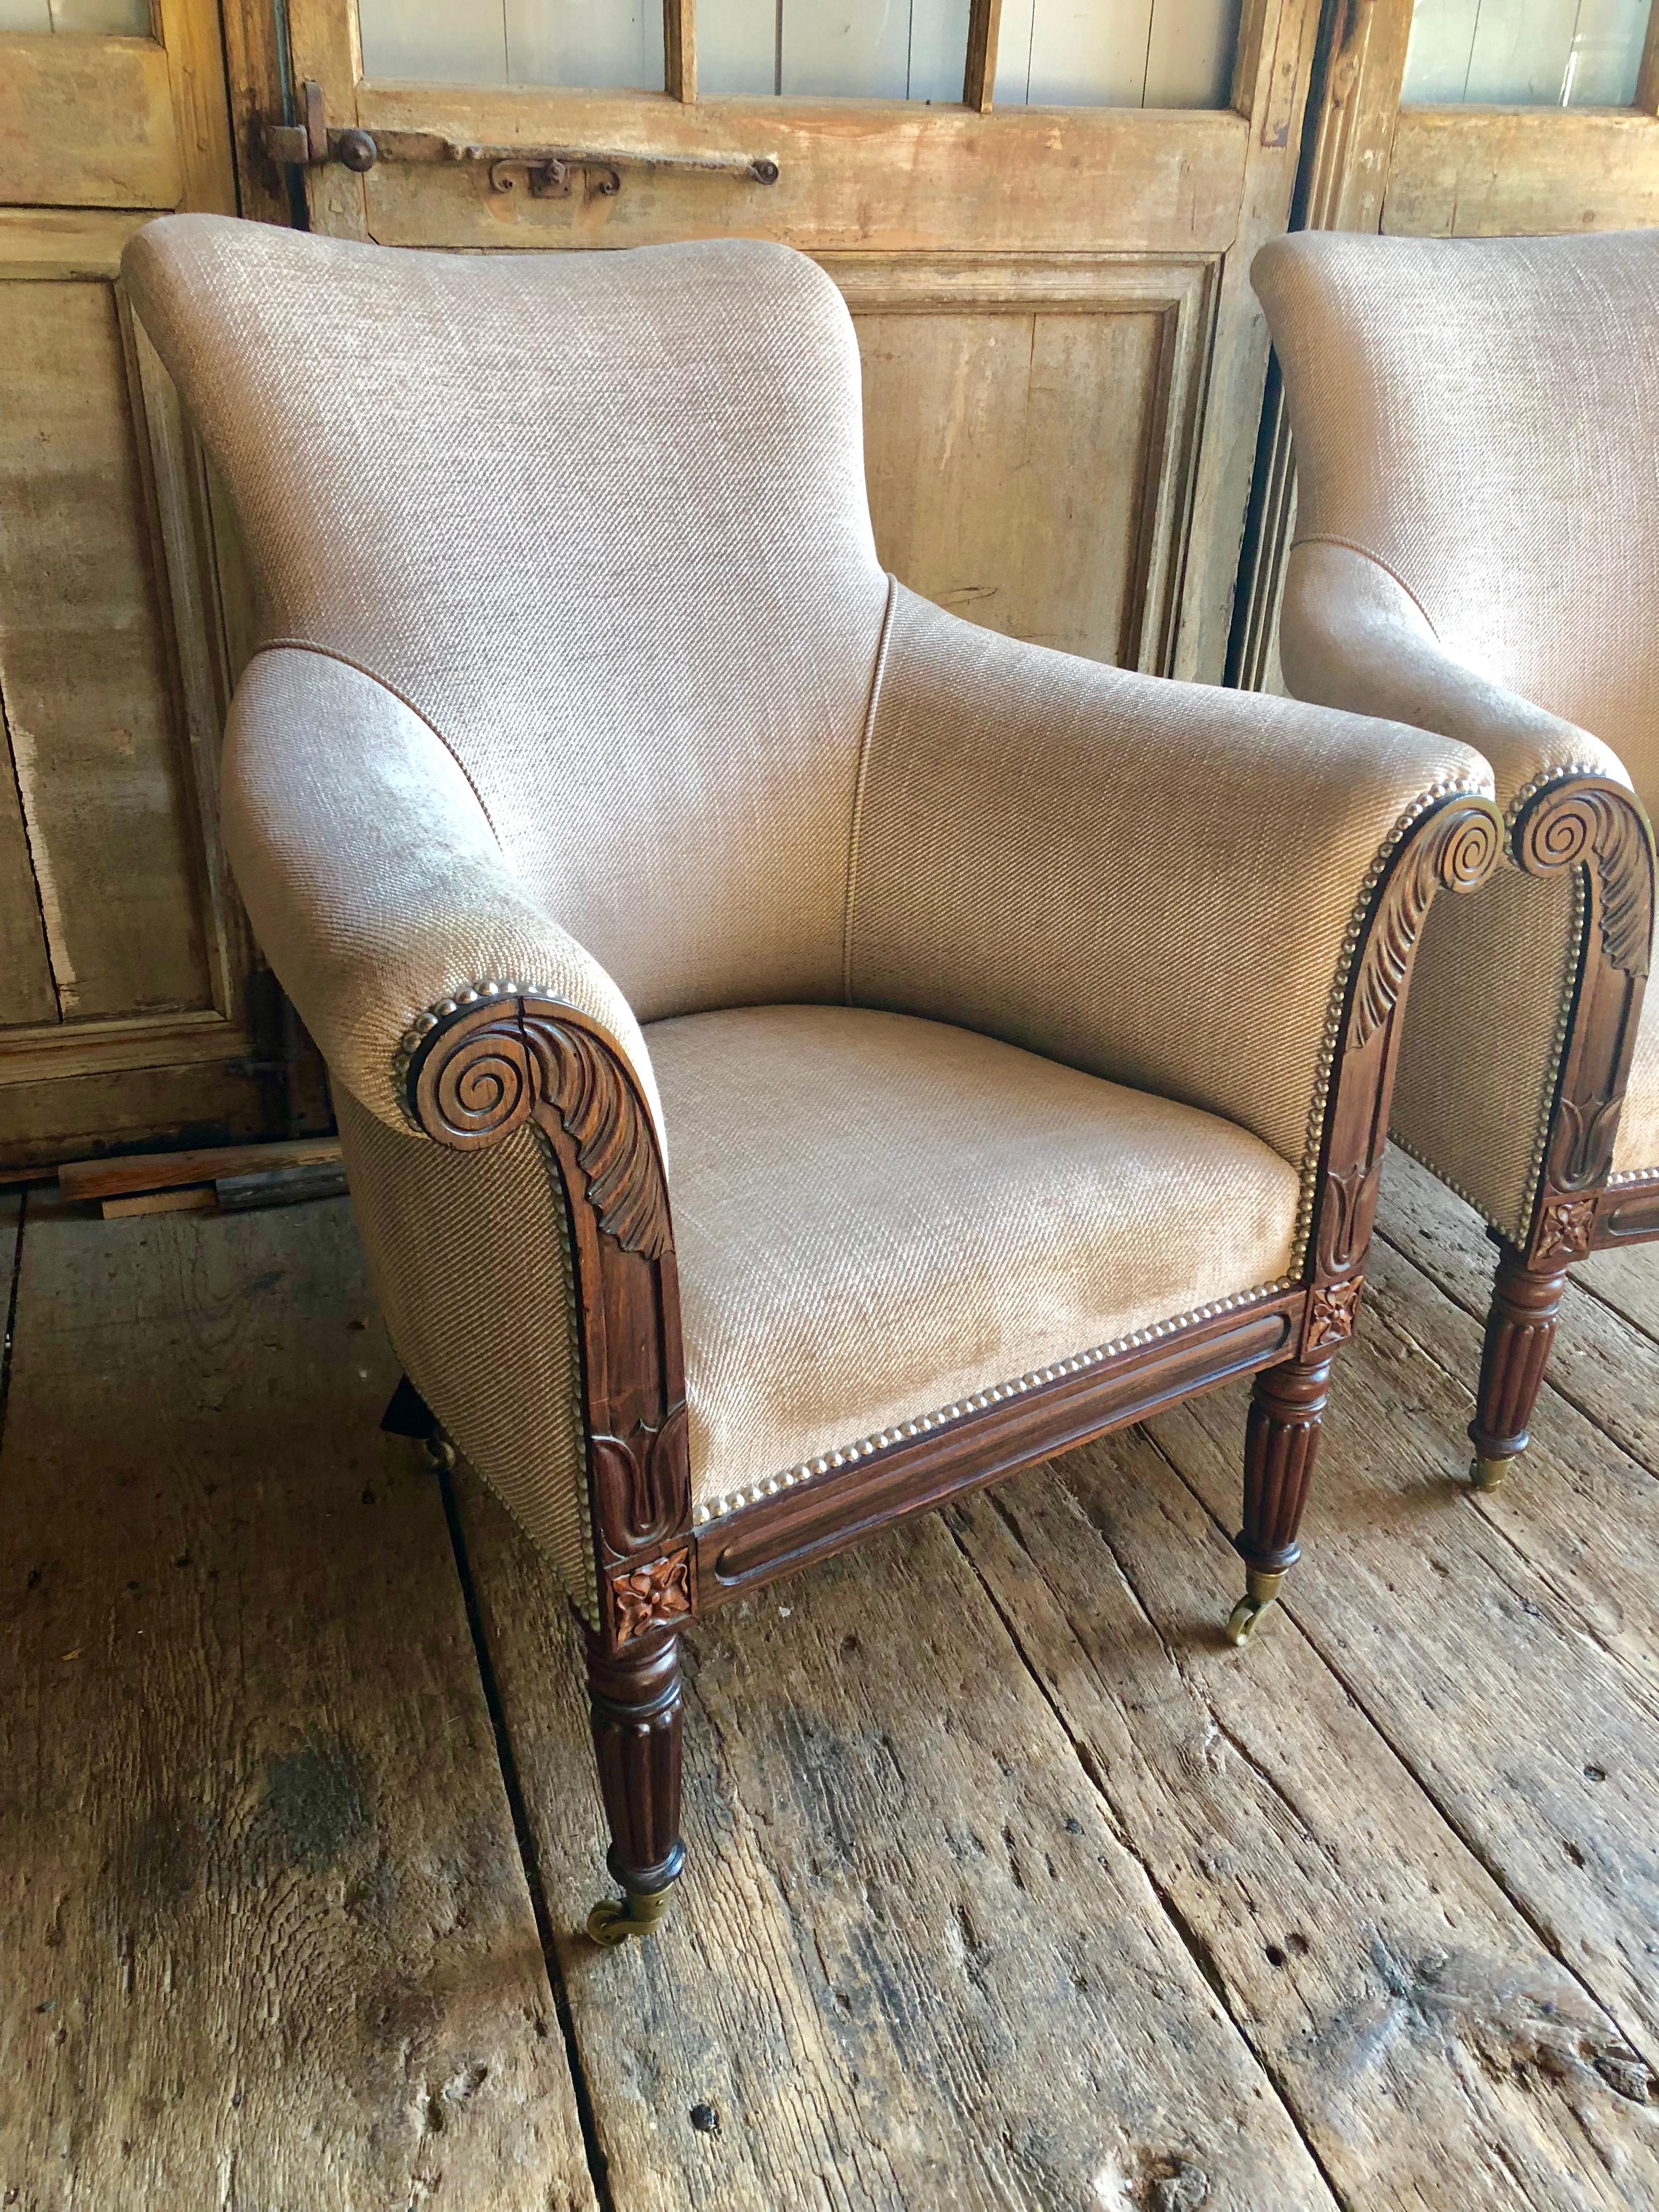 A pair of fine English William IV period rosewood bergeres or “lolling chairs”, circa 1830, with beautifully carved frames, upholstered in a cream cotton upholstery with silver decorative nail-heads. Feet are on brass casters. Sold: Sotheby’s June